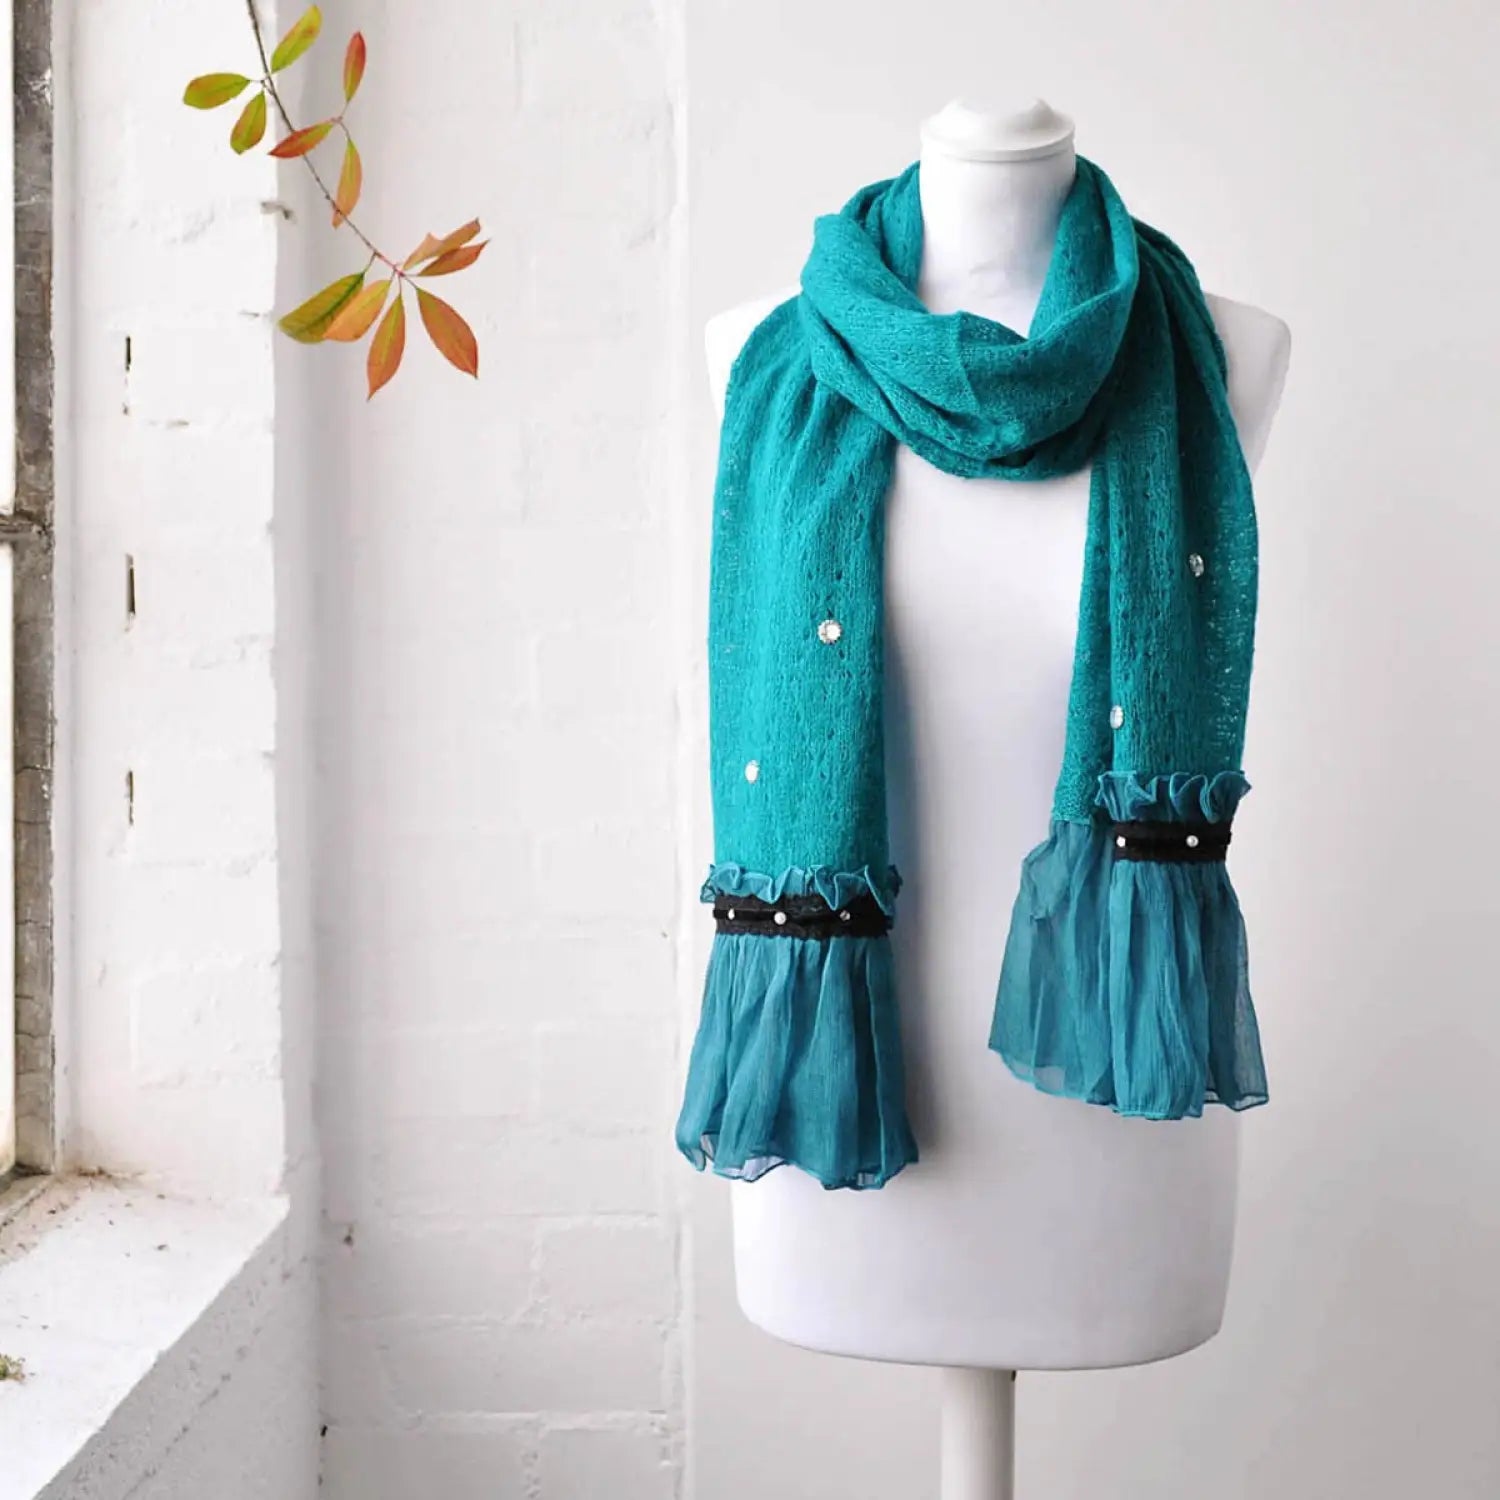 Green bohemian retro ruffle scarf with black buttons